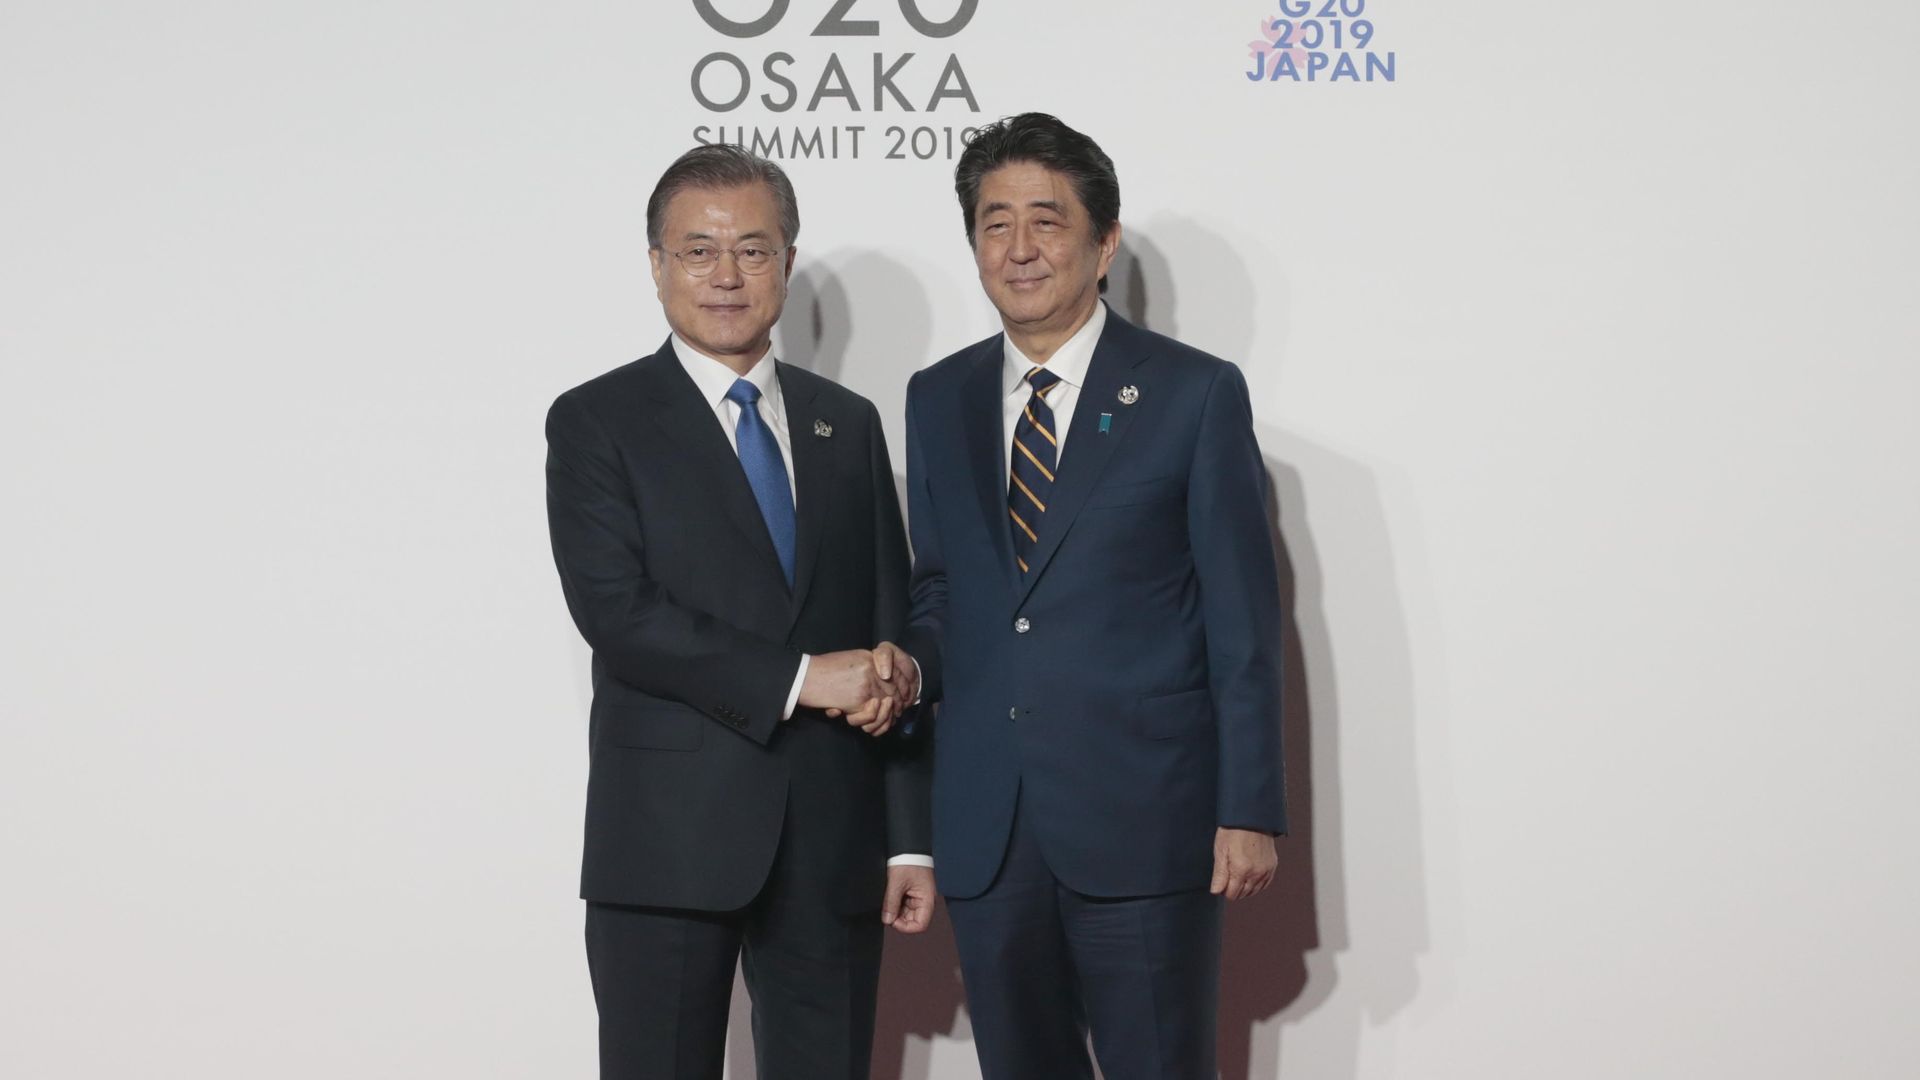 South Korea President Moon Jae-in is welcomed by Japanese Prime Minister Shinzo Abe on the first day of the G20 summit in Osaka, Japan